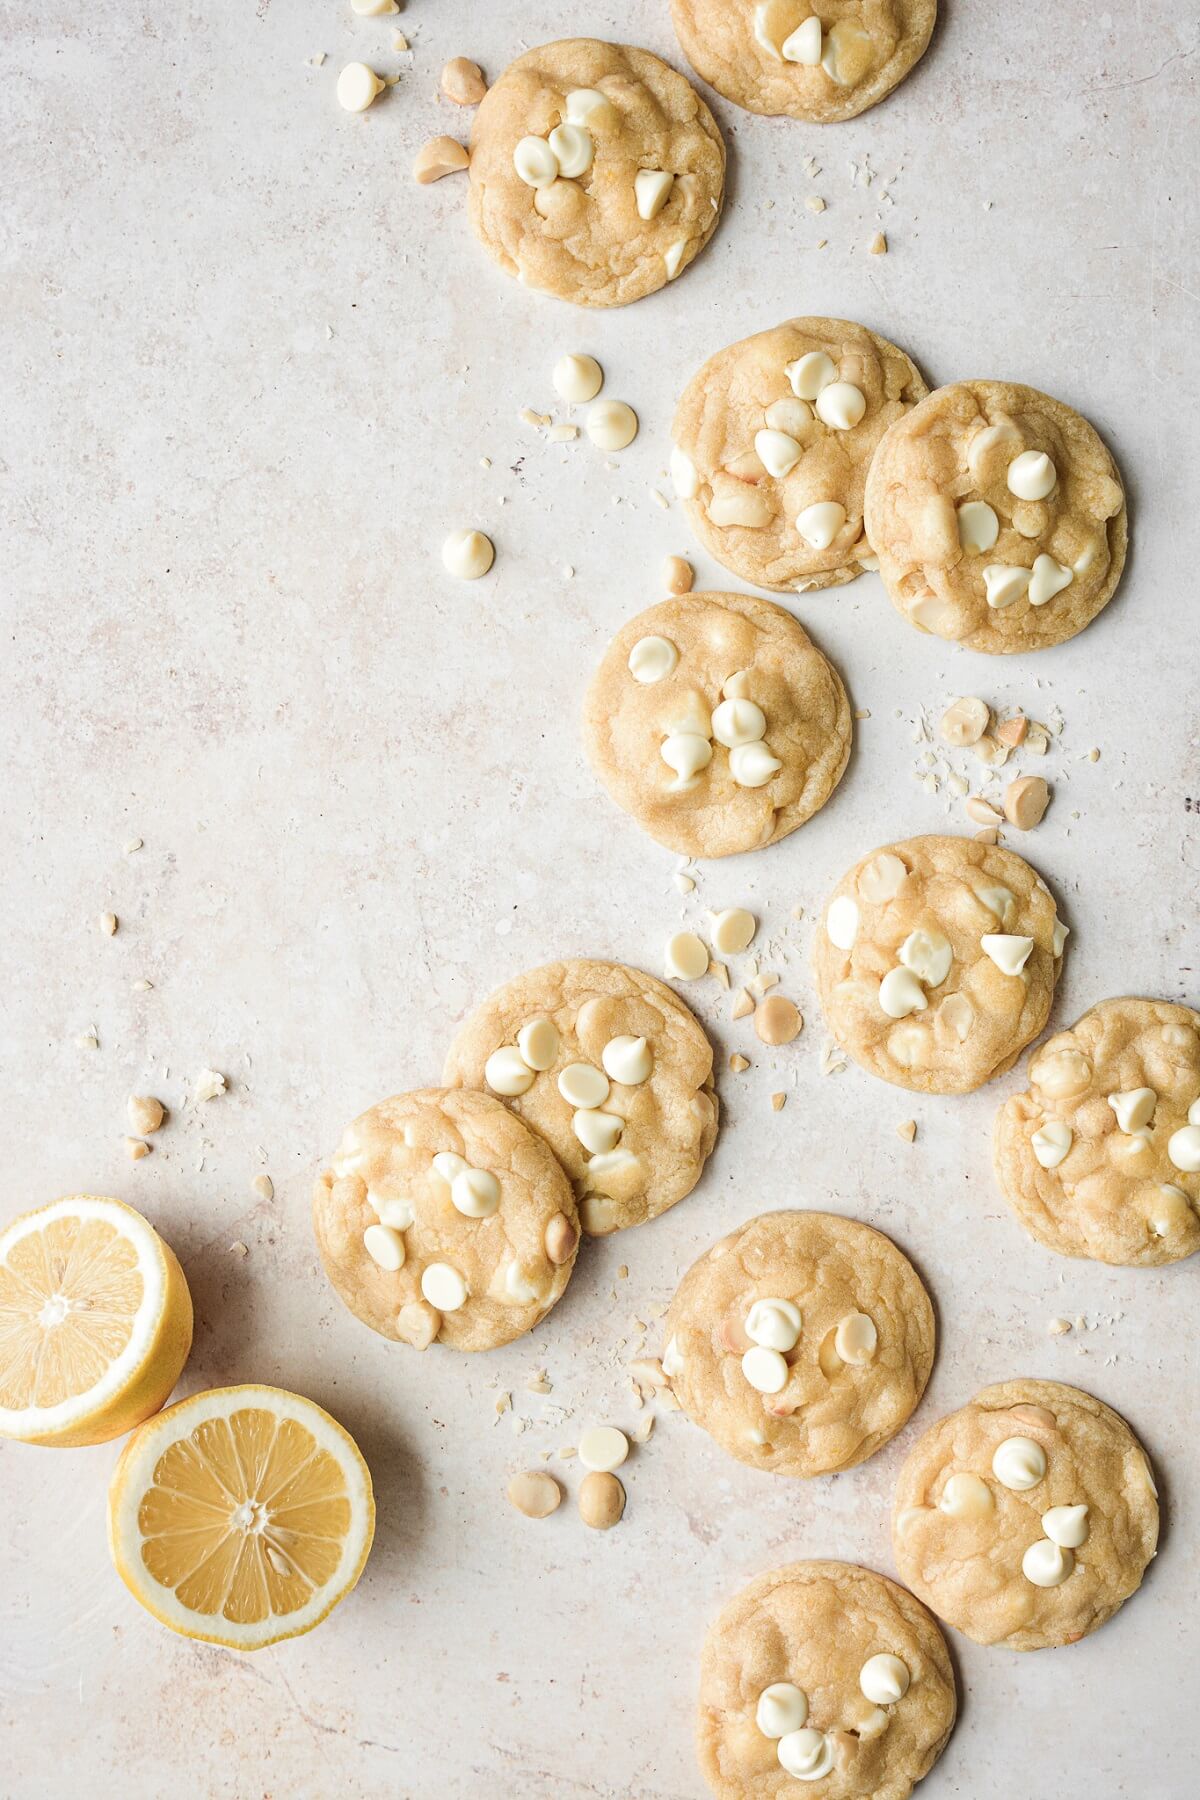 Soft lemon cookies with macadamia nuts and white chocolate chips.